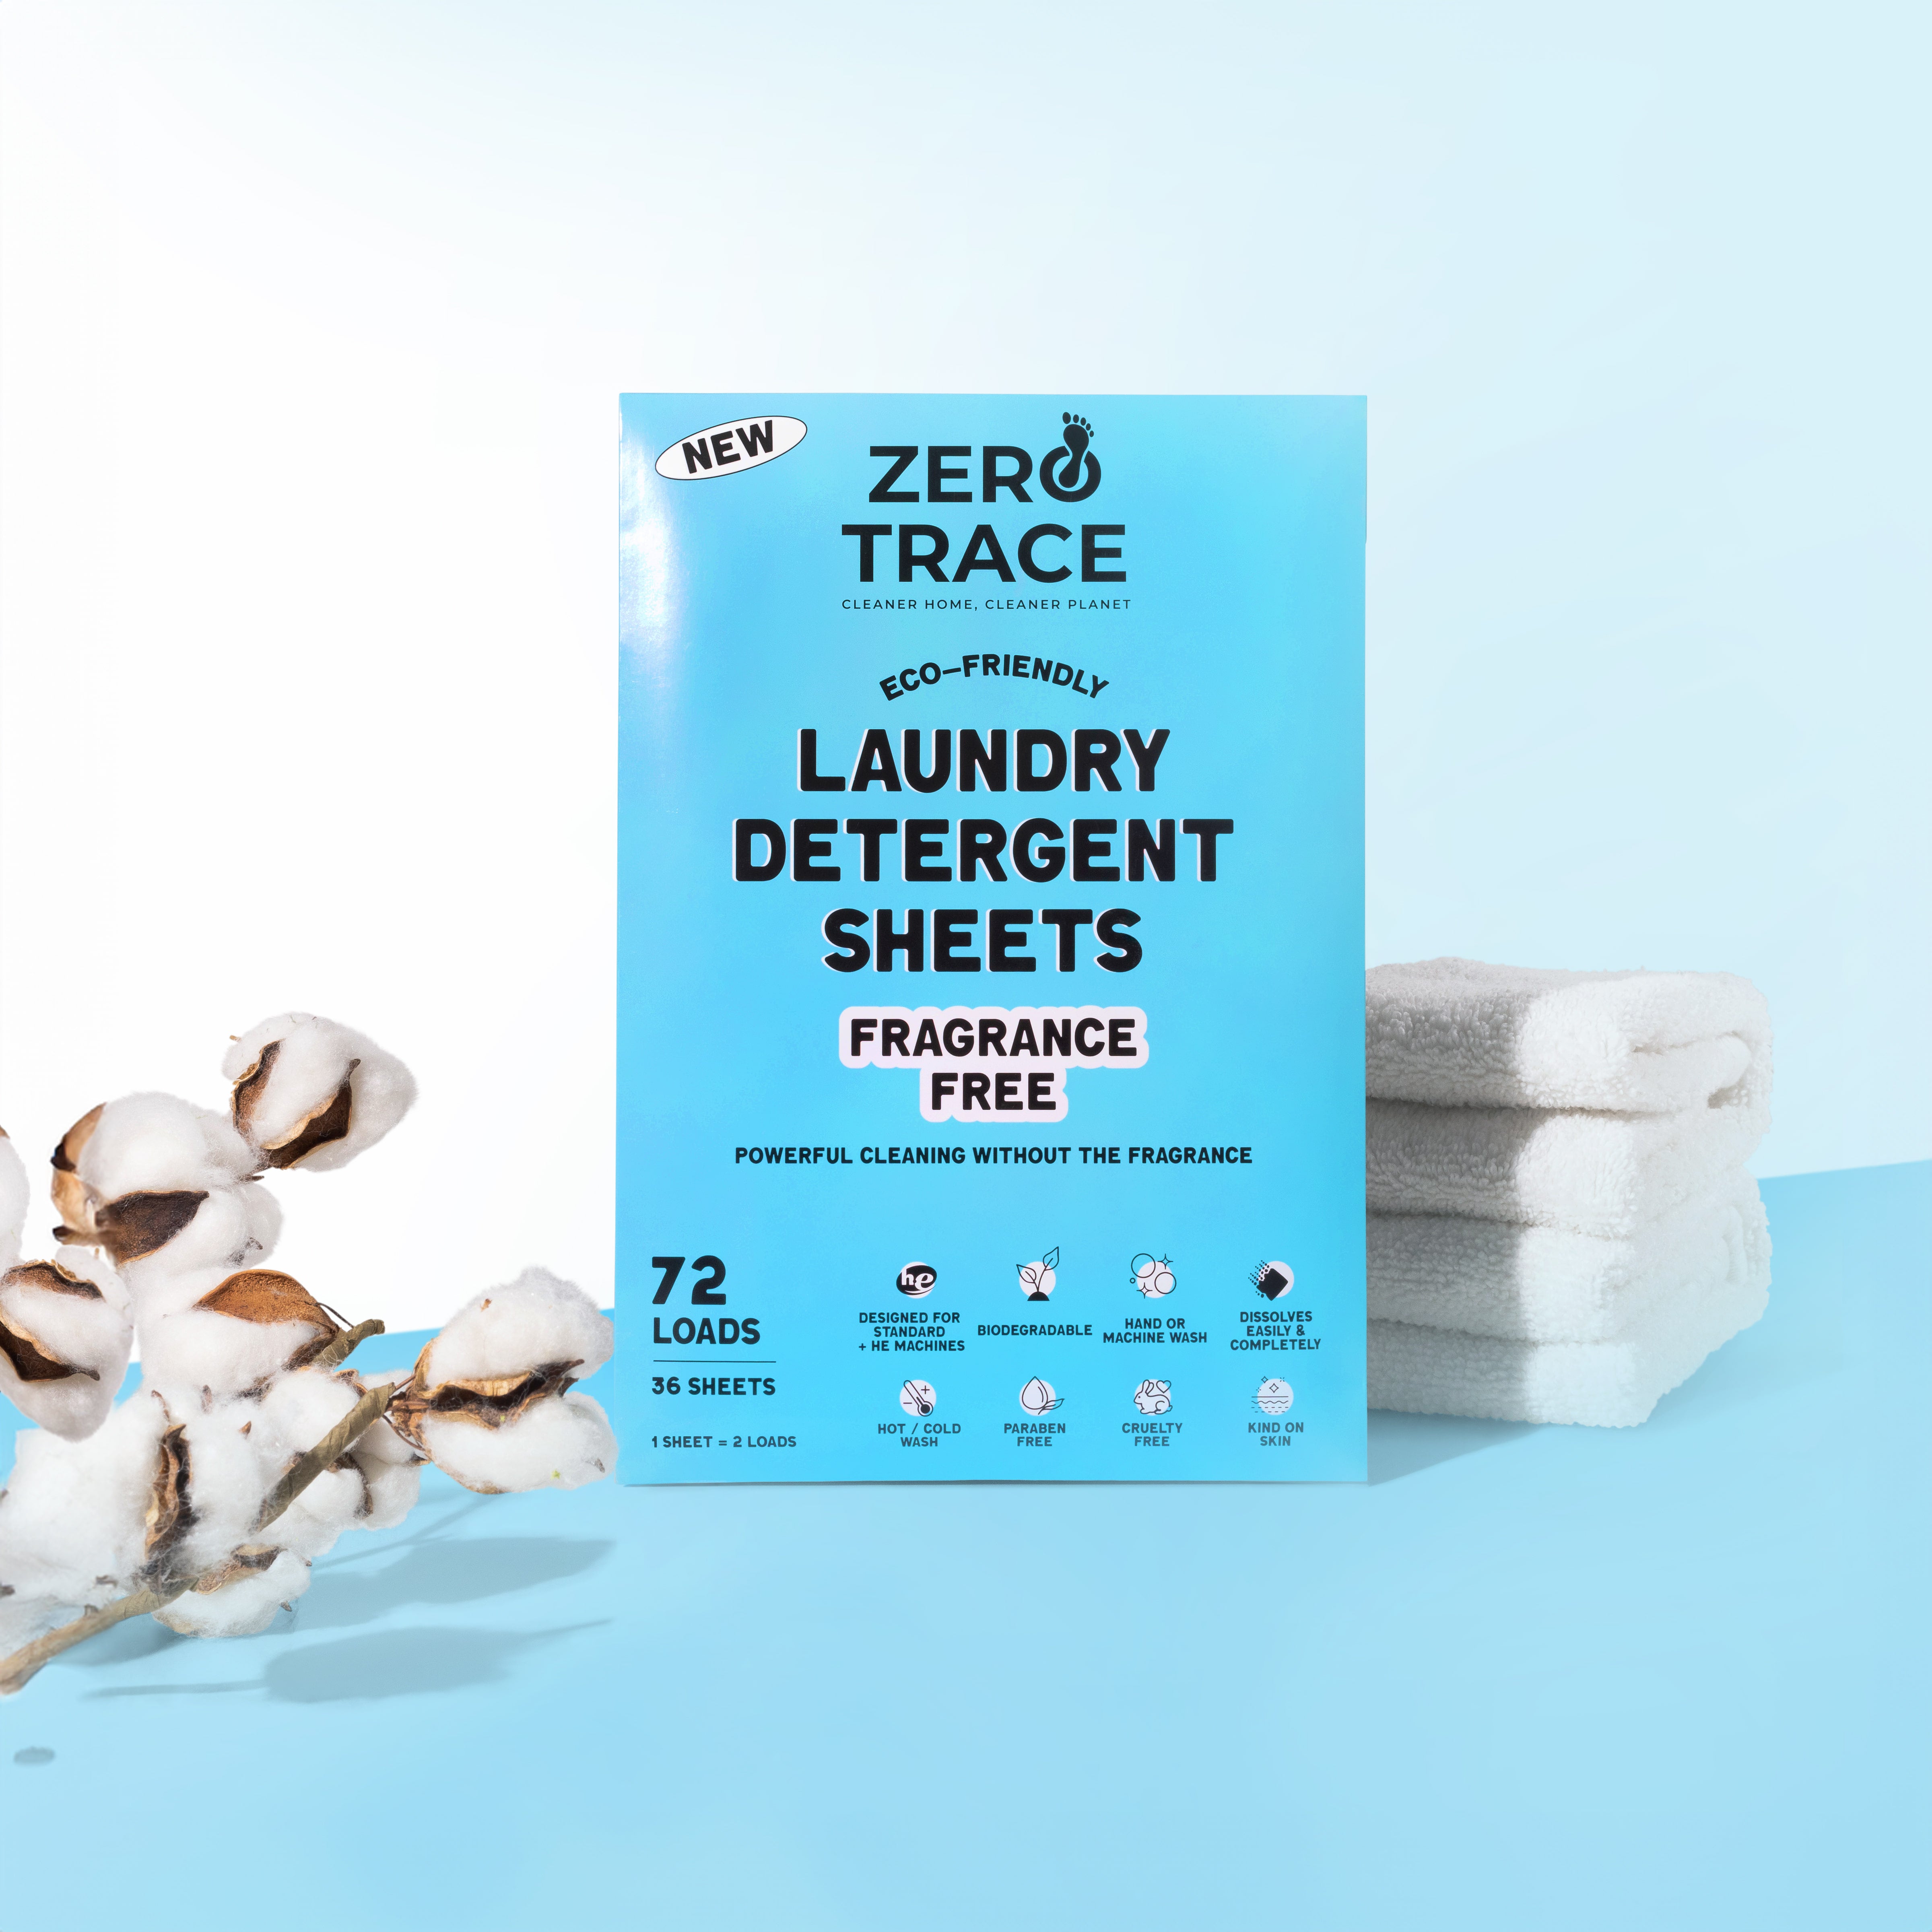 A blue package with white towels and cotton flowers, Zero Trace laundry detergent sheets, safe and eco-friendly.